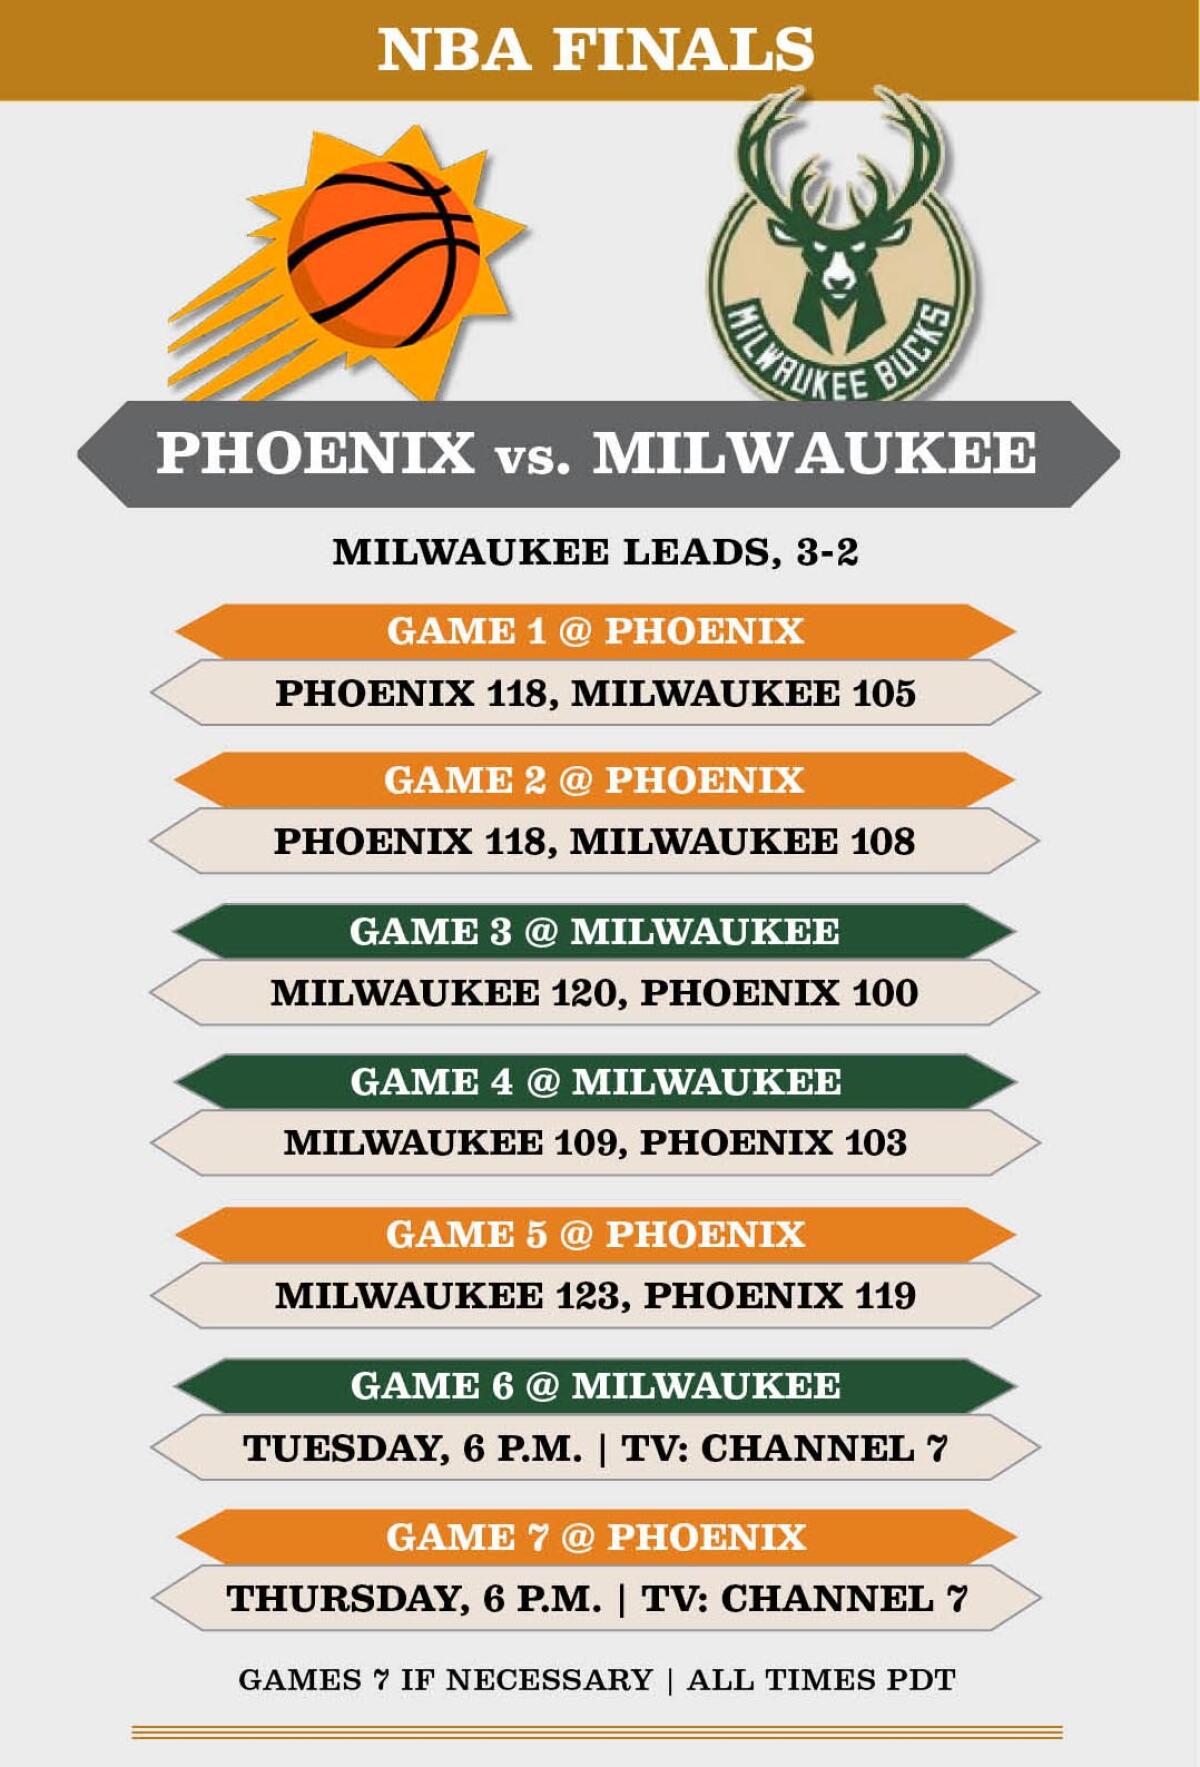 The Milwaukee Bucks defeated the Phoenix Suns in Game 5 of the NBA Finals on Saturday to take a 3-2 lead in the series.